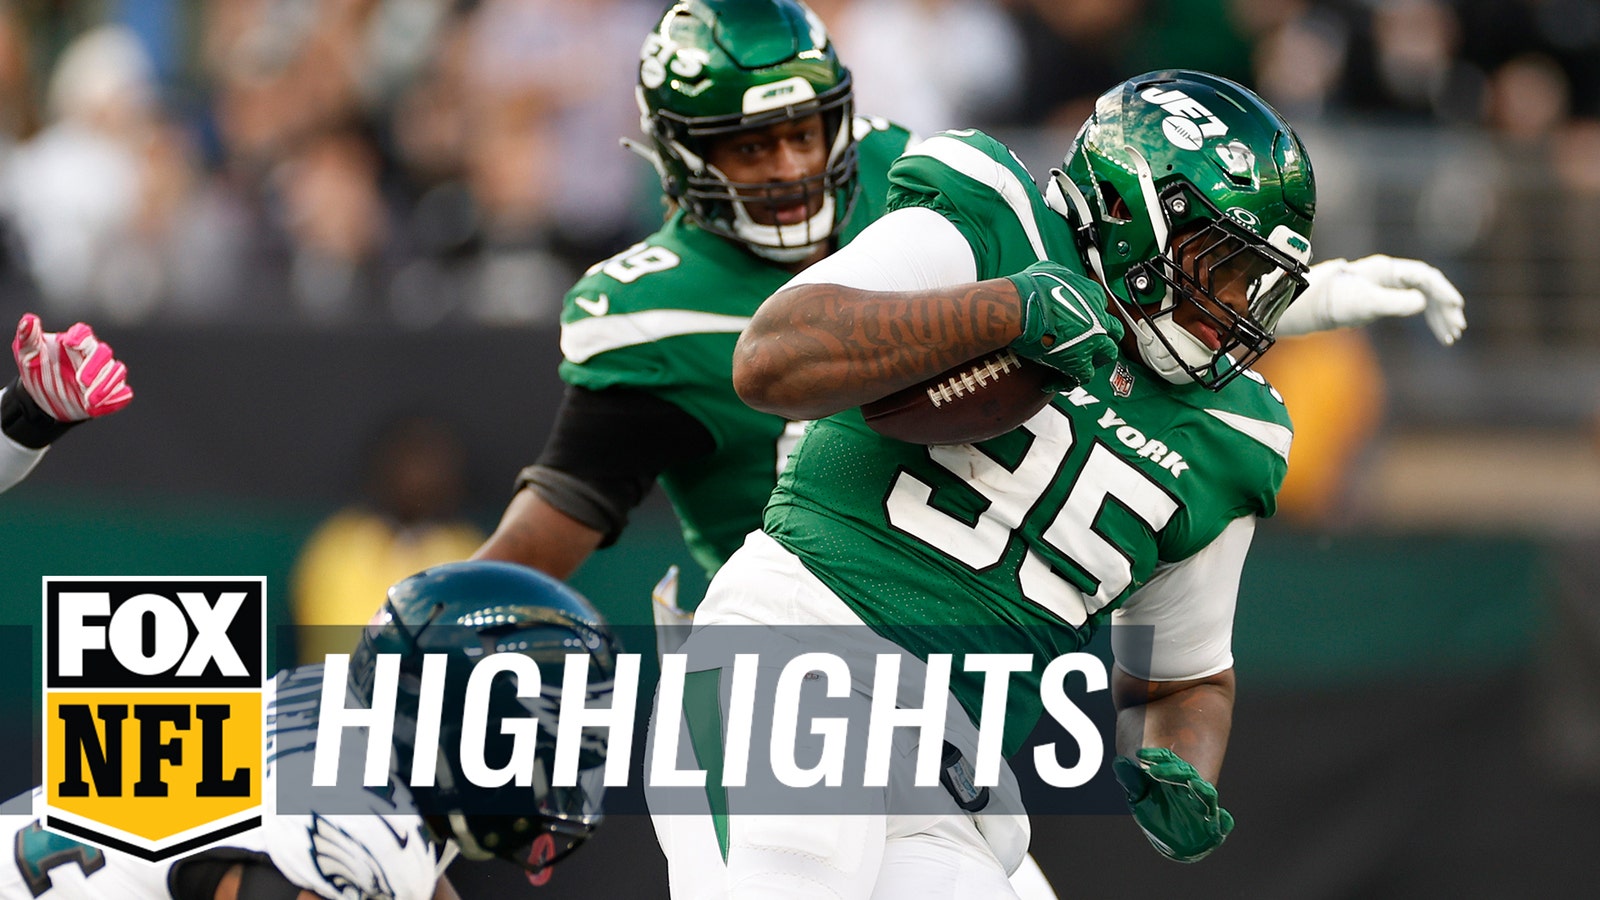 Jets defense forces four turnover in stunning 20-14 win over Eagles 